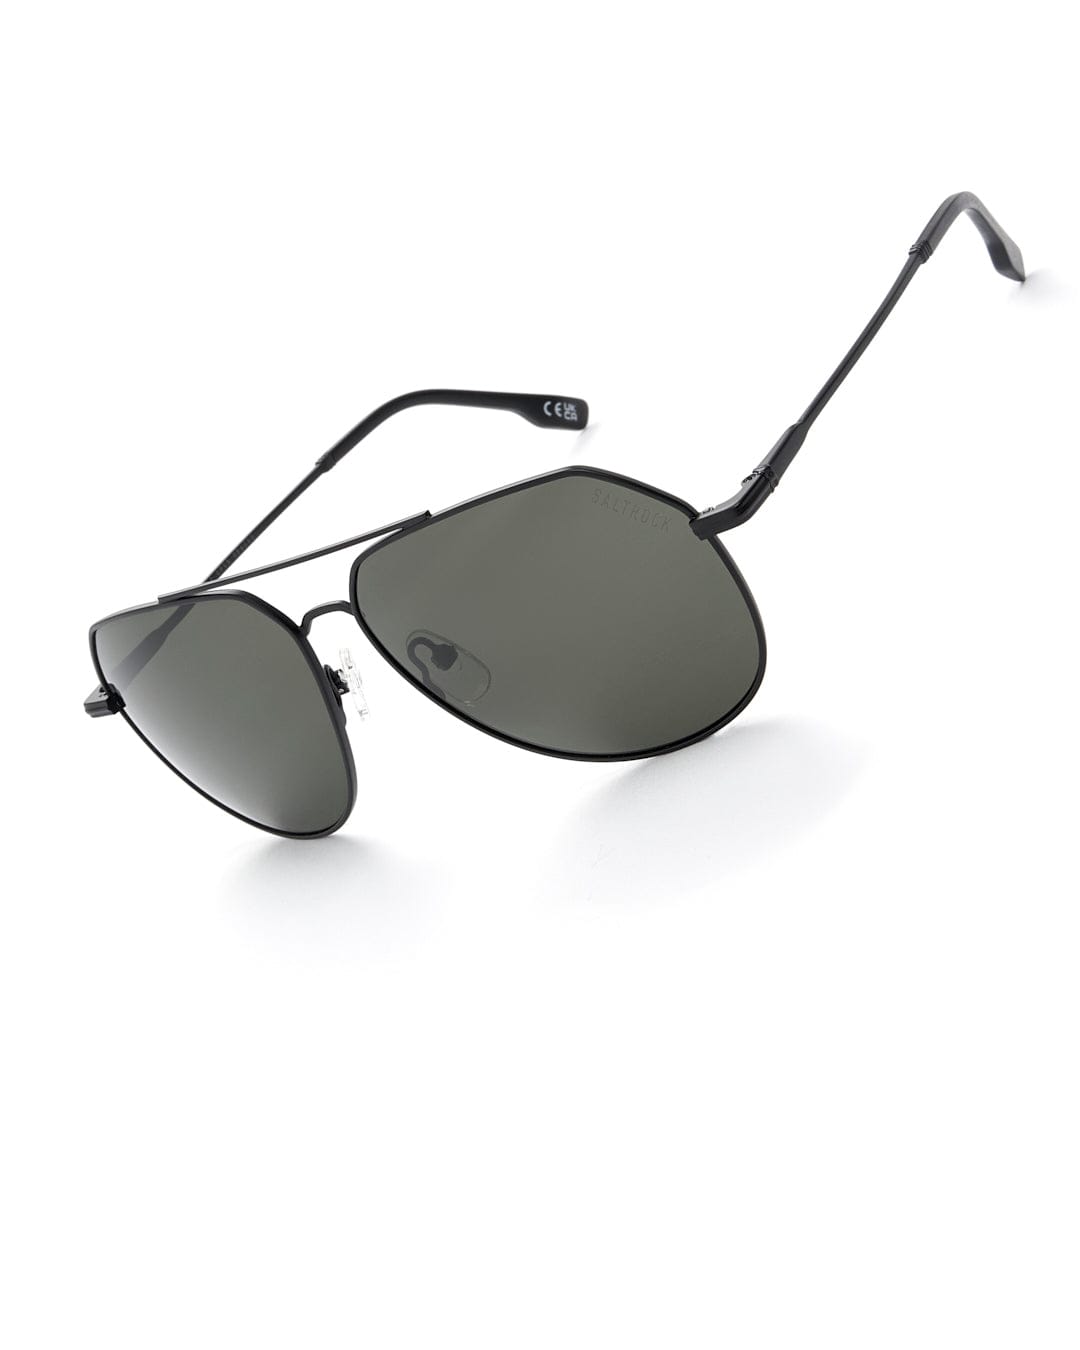 A pair of Saltrock Cruiser - Aviator Polarised Sunglasses in black with a metal frame on a white background.